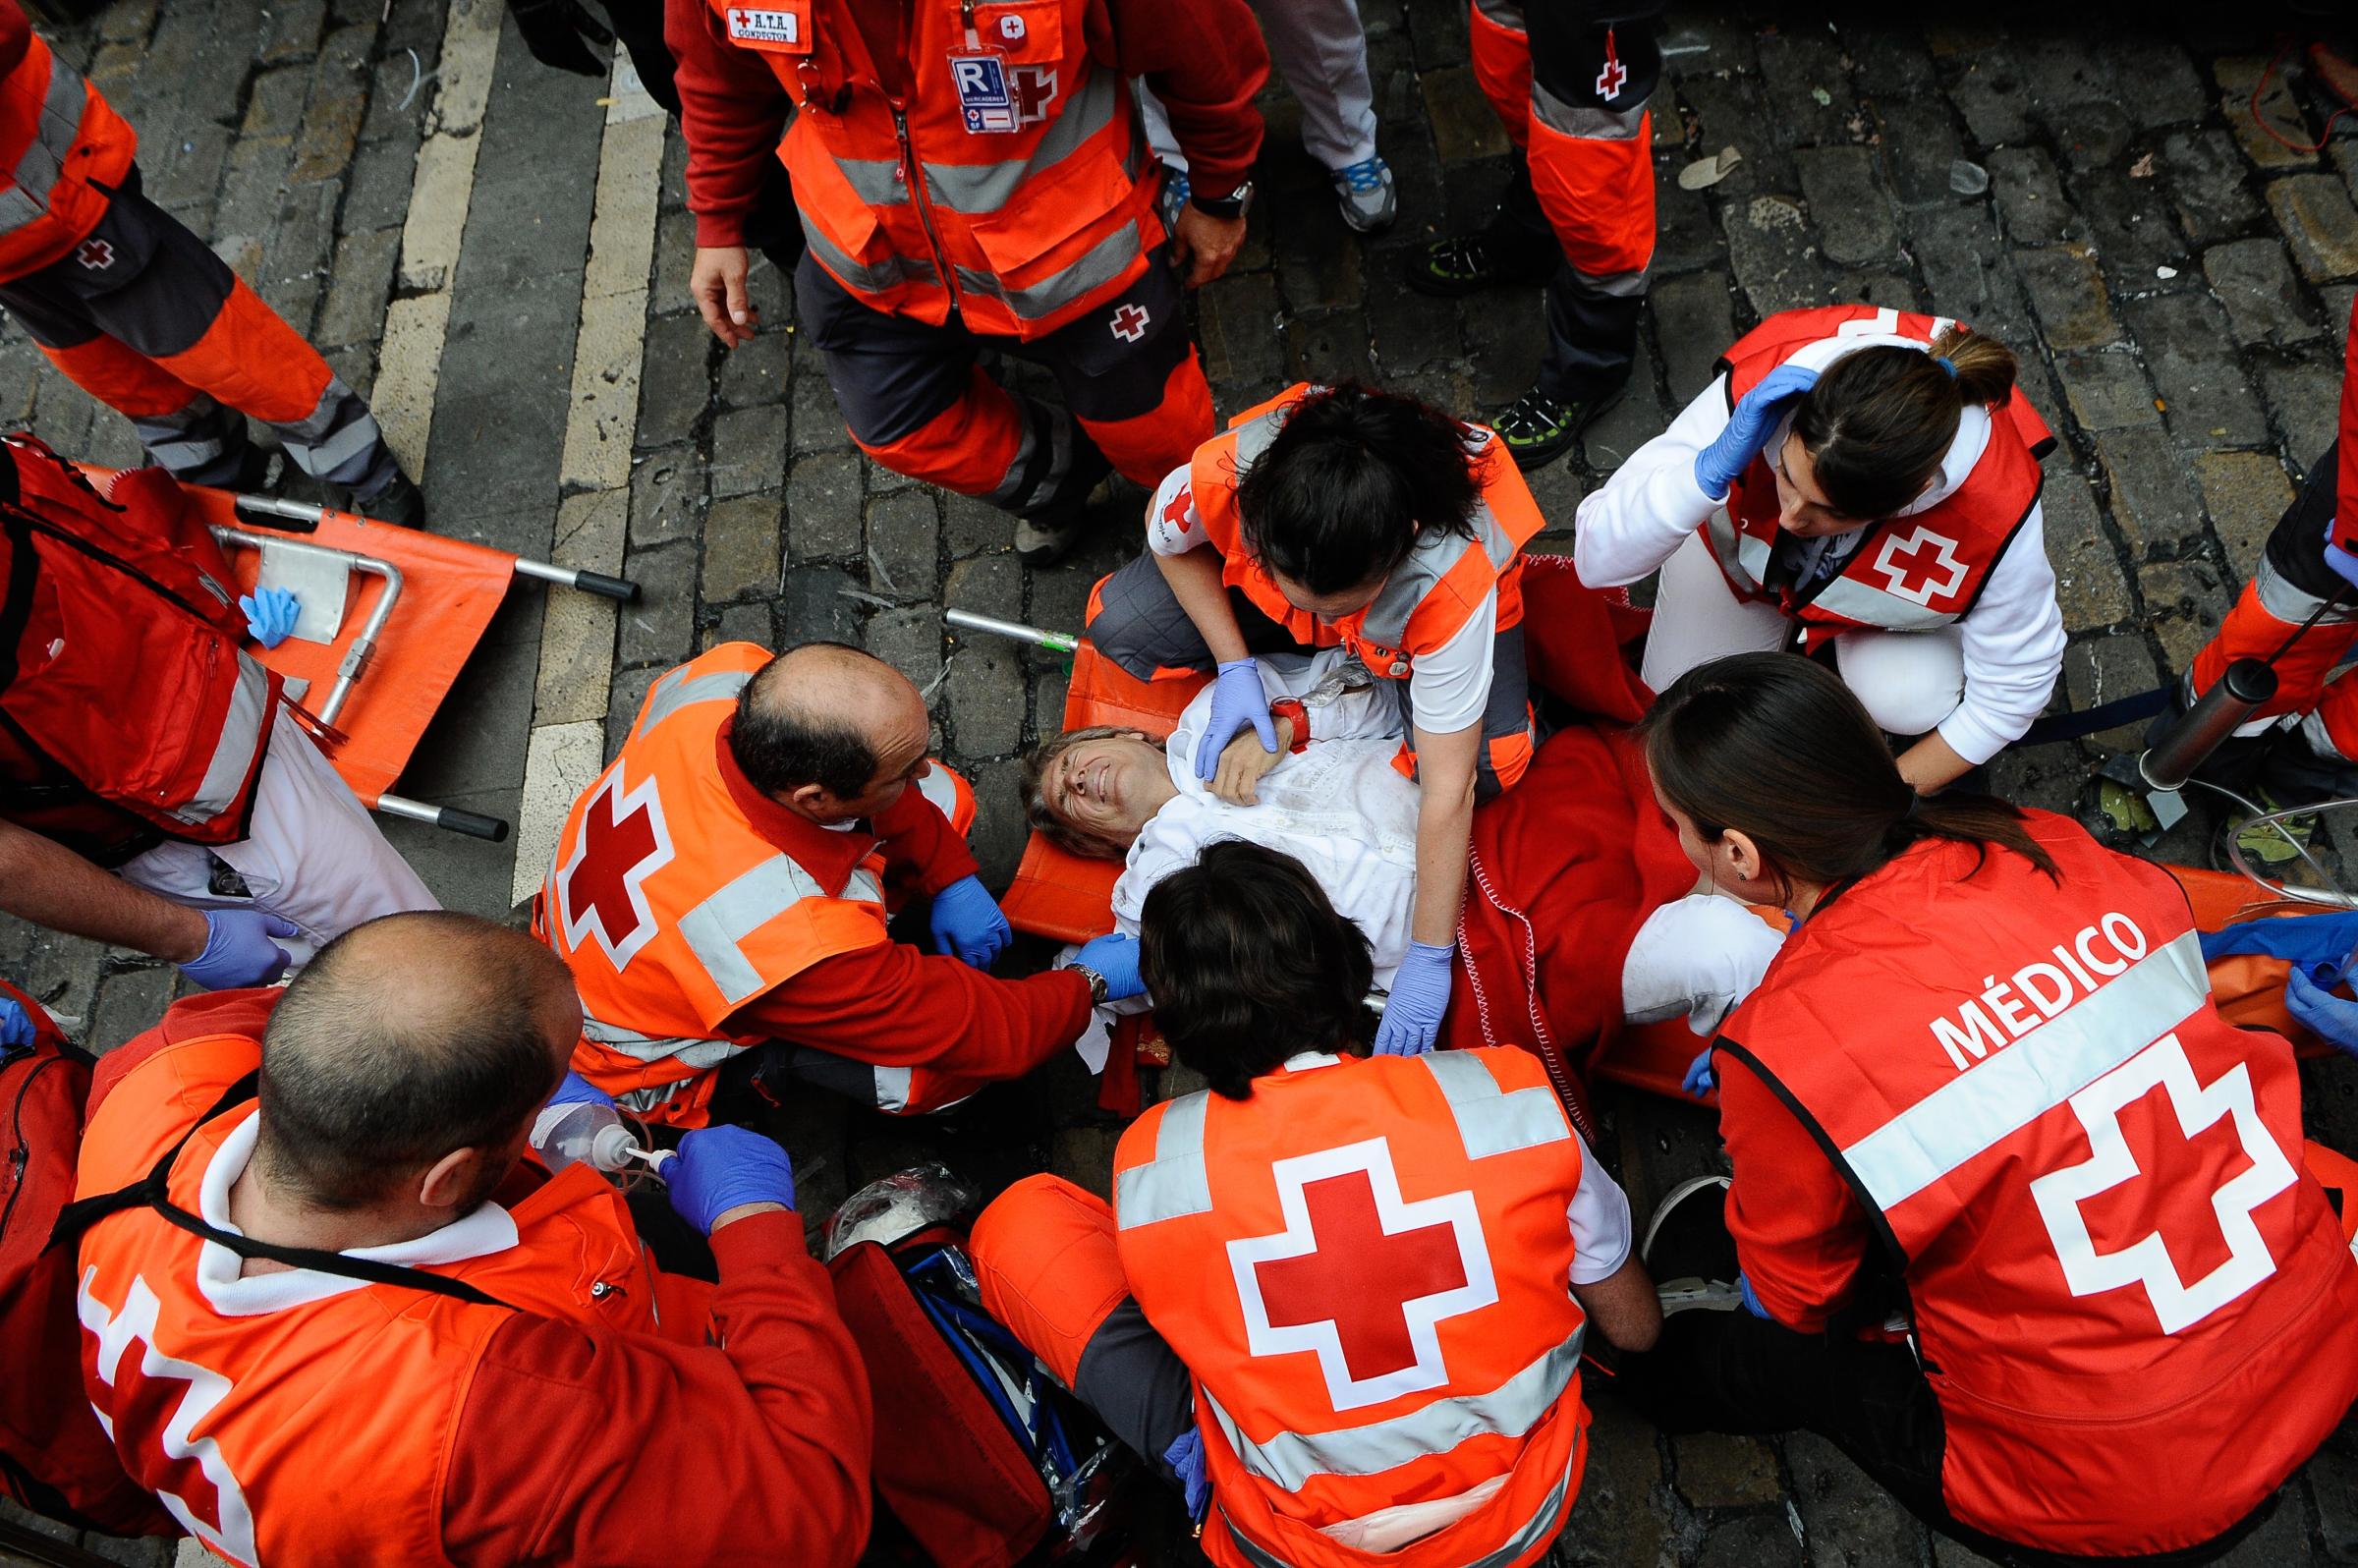 A wounded man is treated by Red Cross health services during the running of the bulls of the San Fermin festival on July 7, 2014 in Pamplona, Spain.